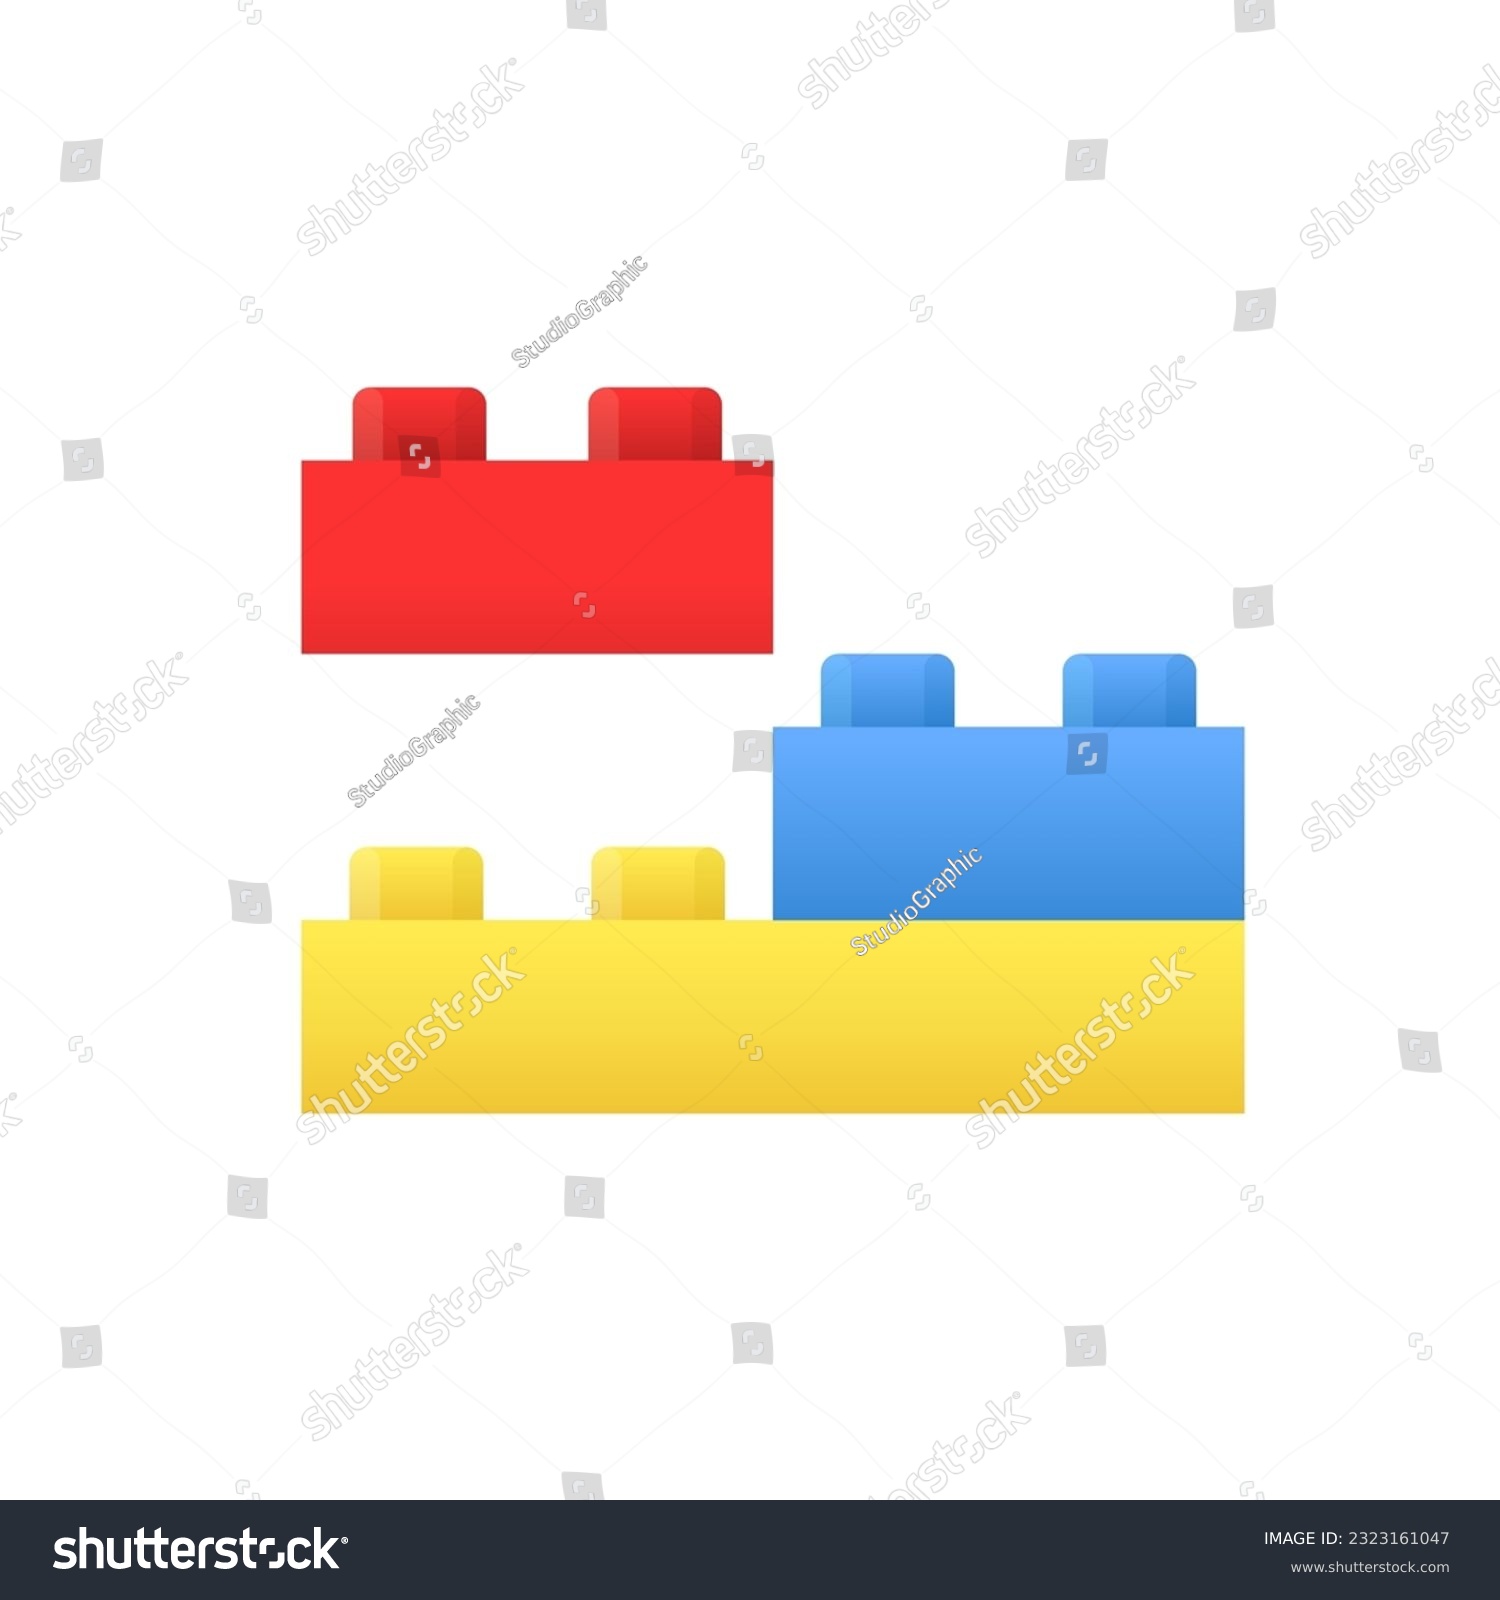 SVG of Сolorful building block toy. Concept of building, industry, engineering, brainstorming, development. isolated on a white background. flat style trend modern logo design. Vector illustration svg